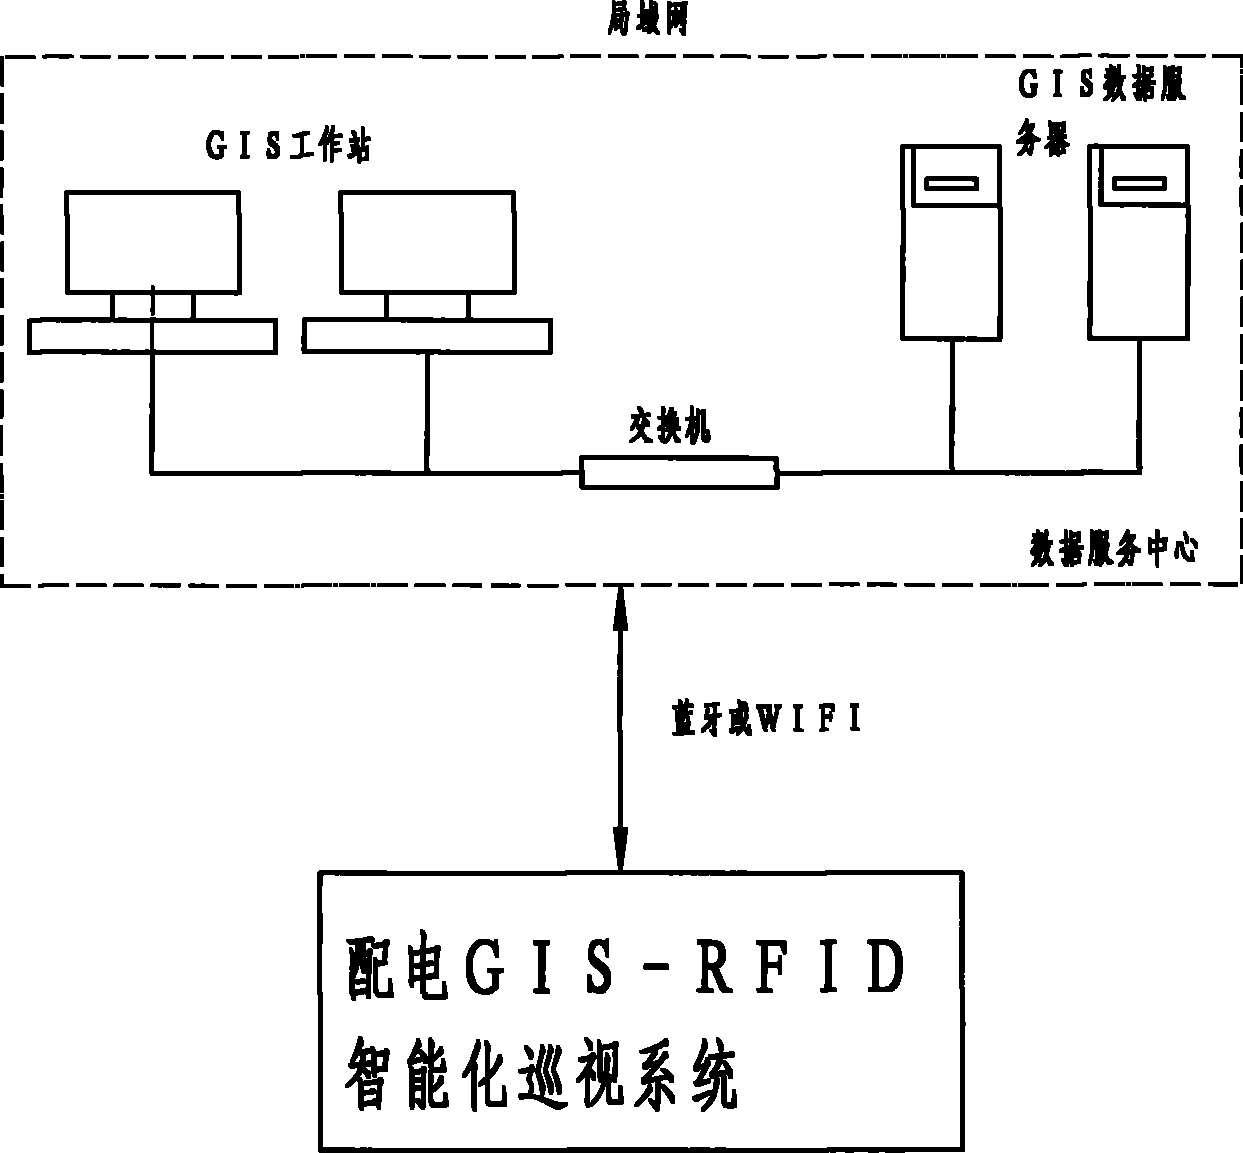 Intelligent distribution patrol and management system and work flow thereof